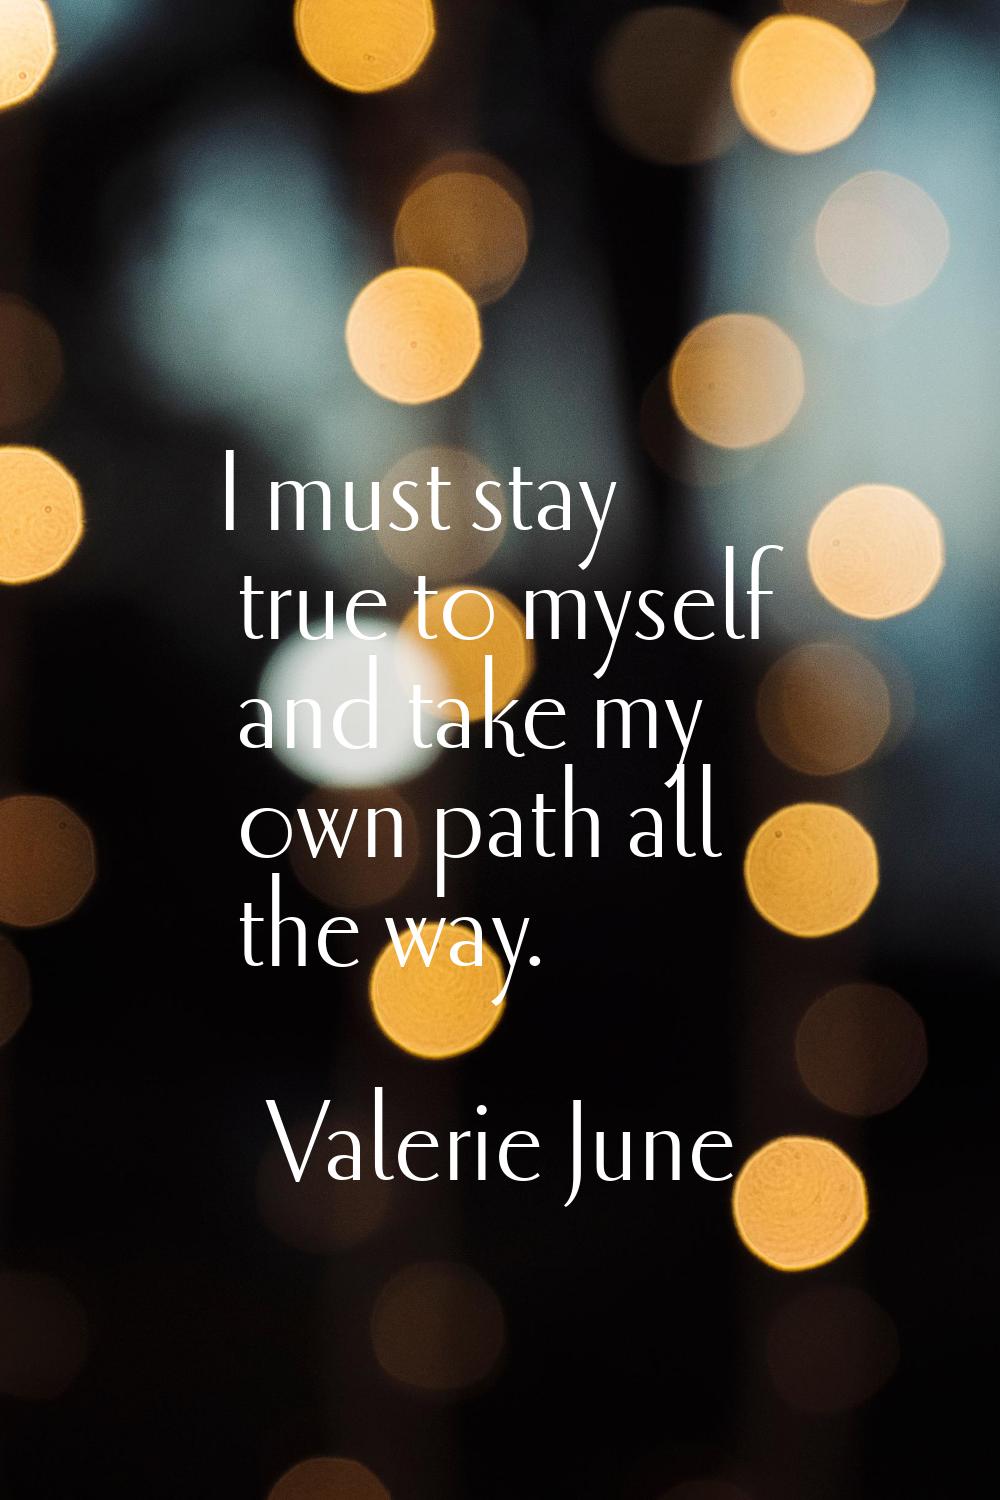 I must stay true to myself and take my own path all the way.